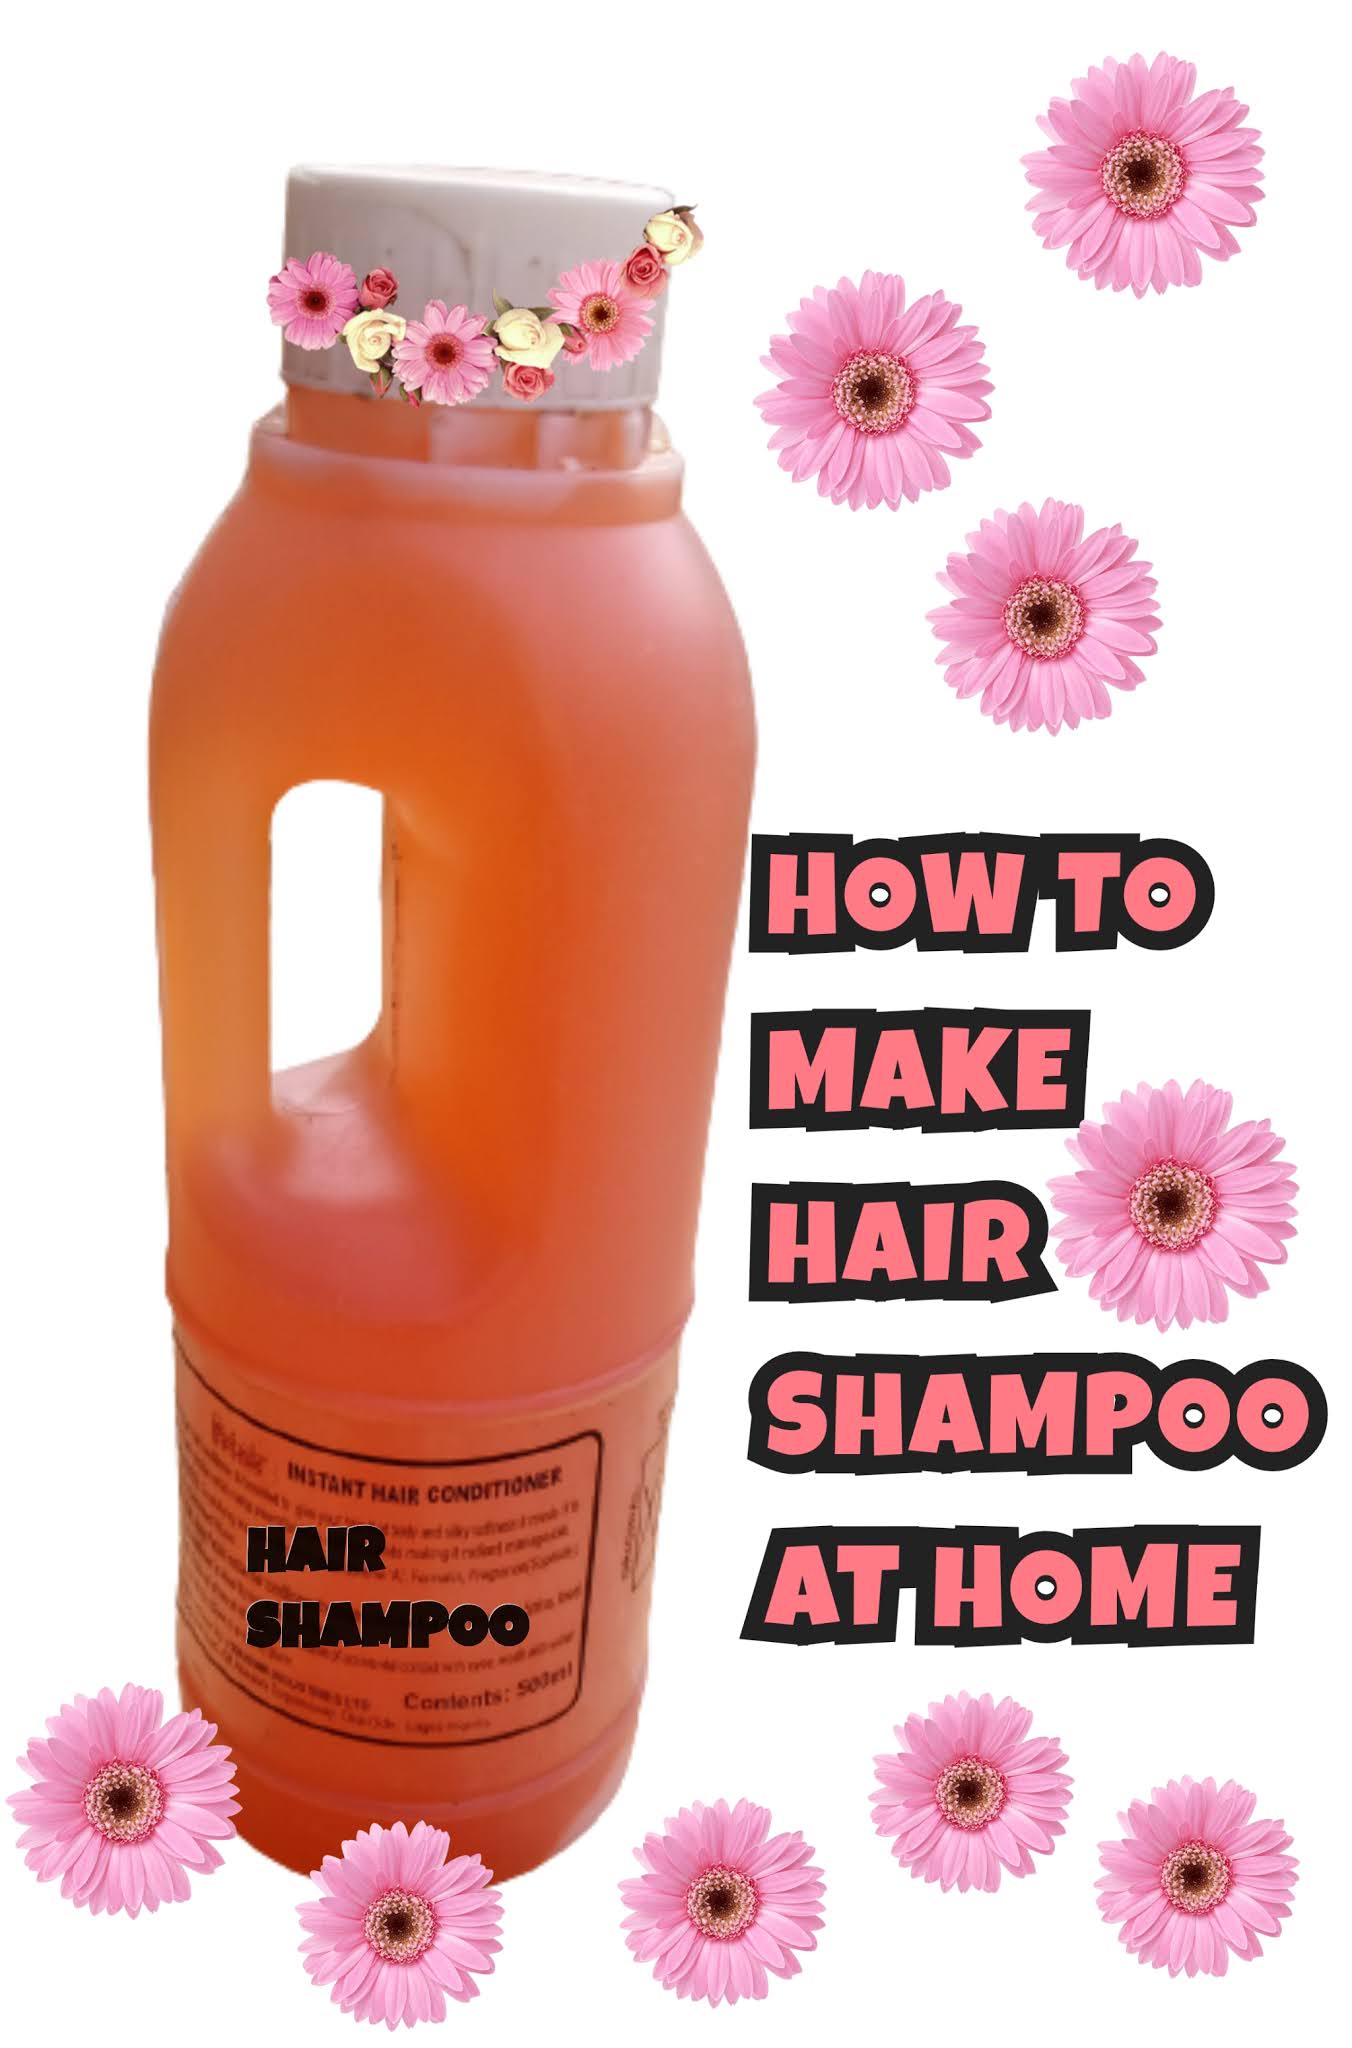 HOW TO PRODUCE HAIR SHAMPOO IN NIGERIA AND MAKE MONEY